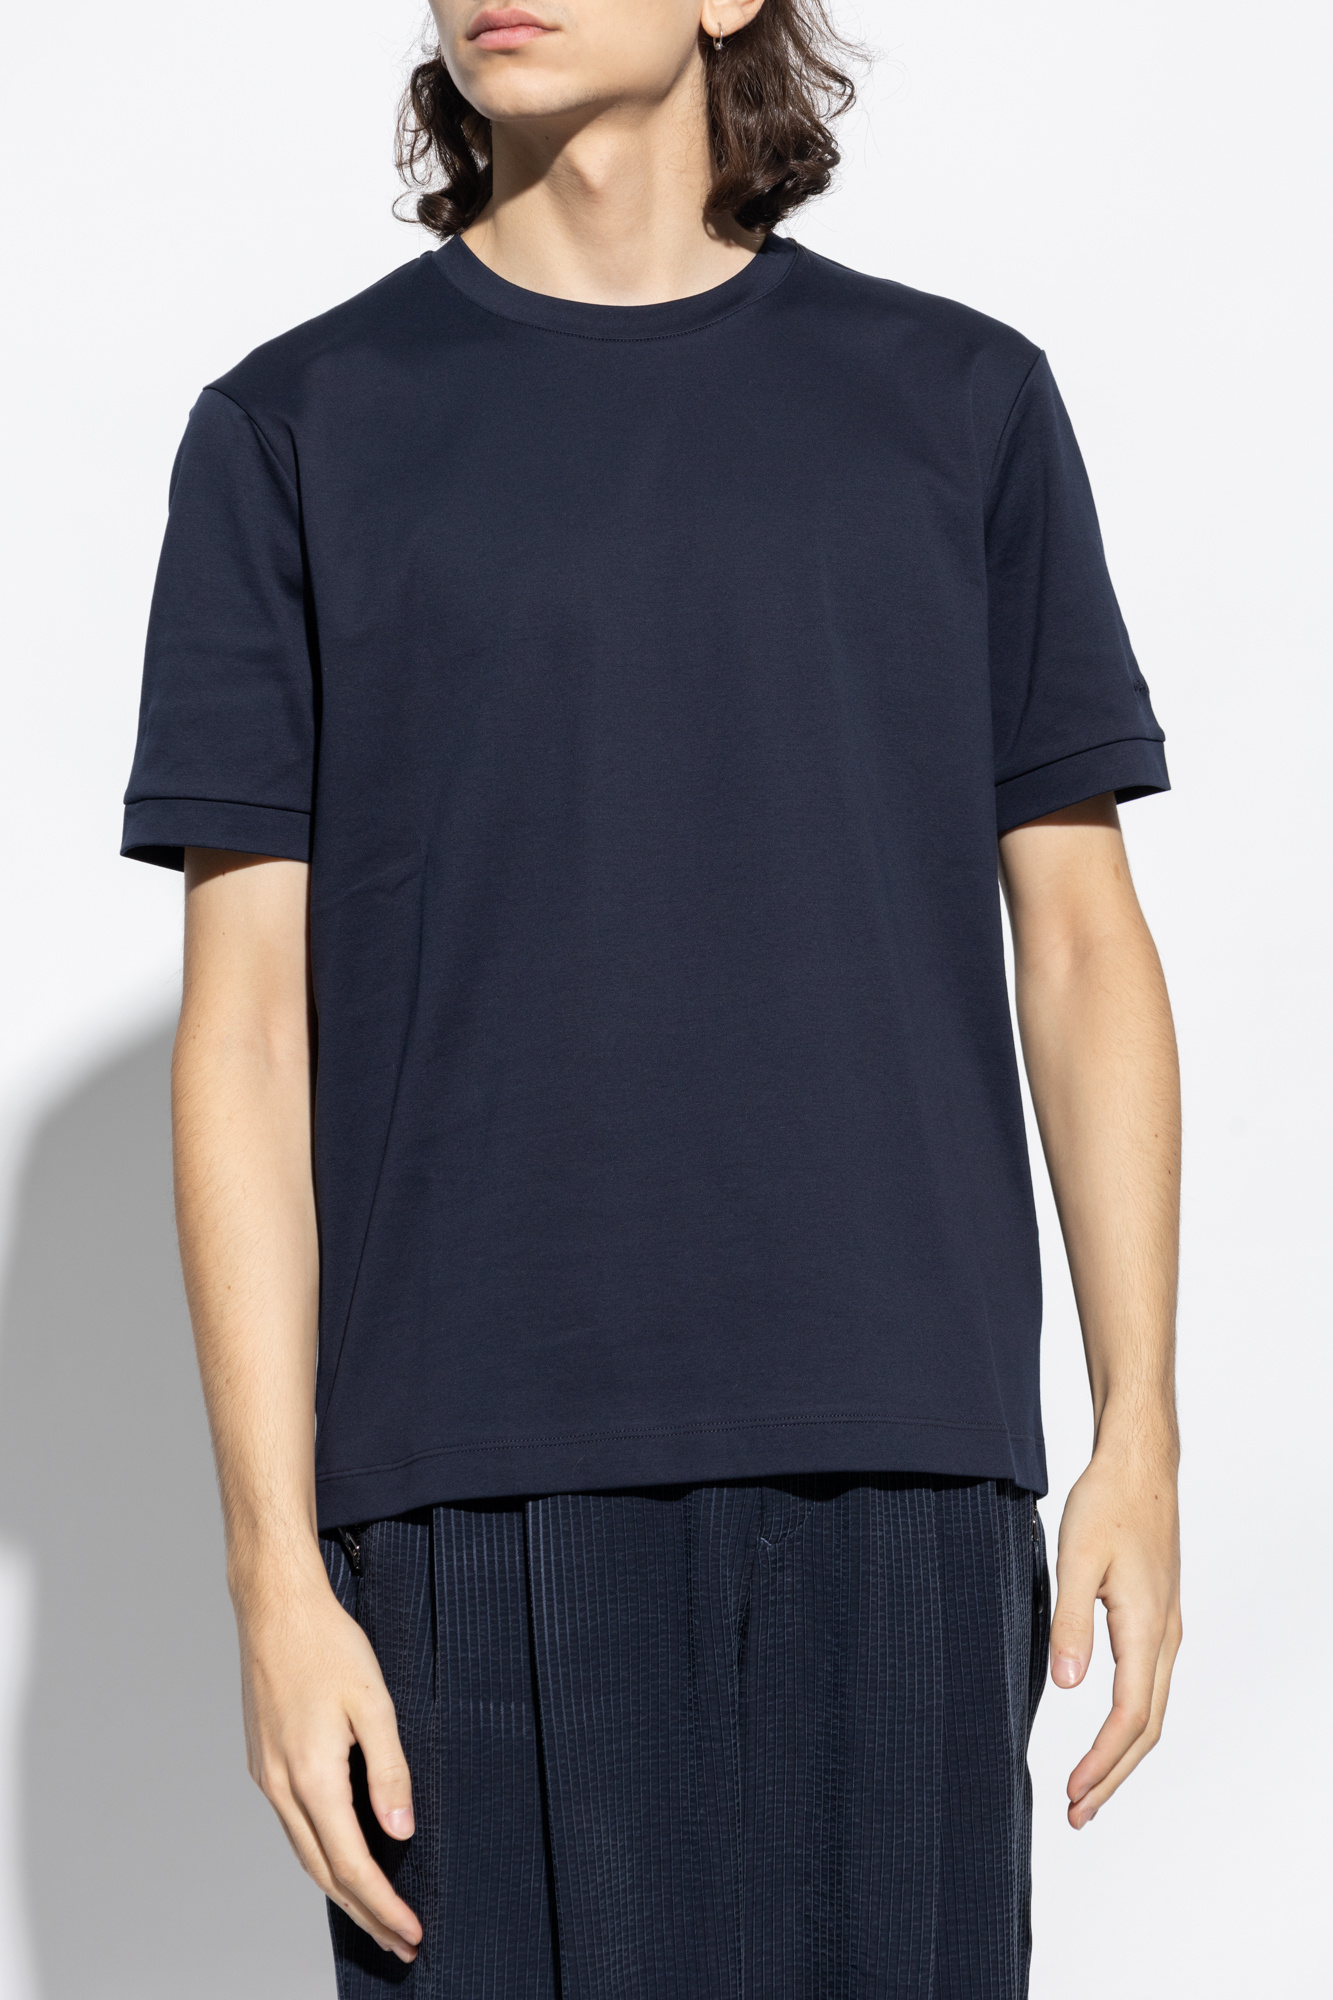 Giorgio magnet armani ‘Sustainable’ collection T-shirt